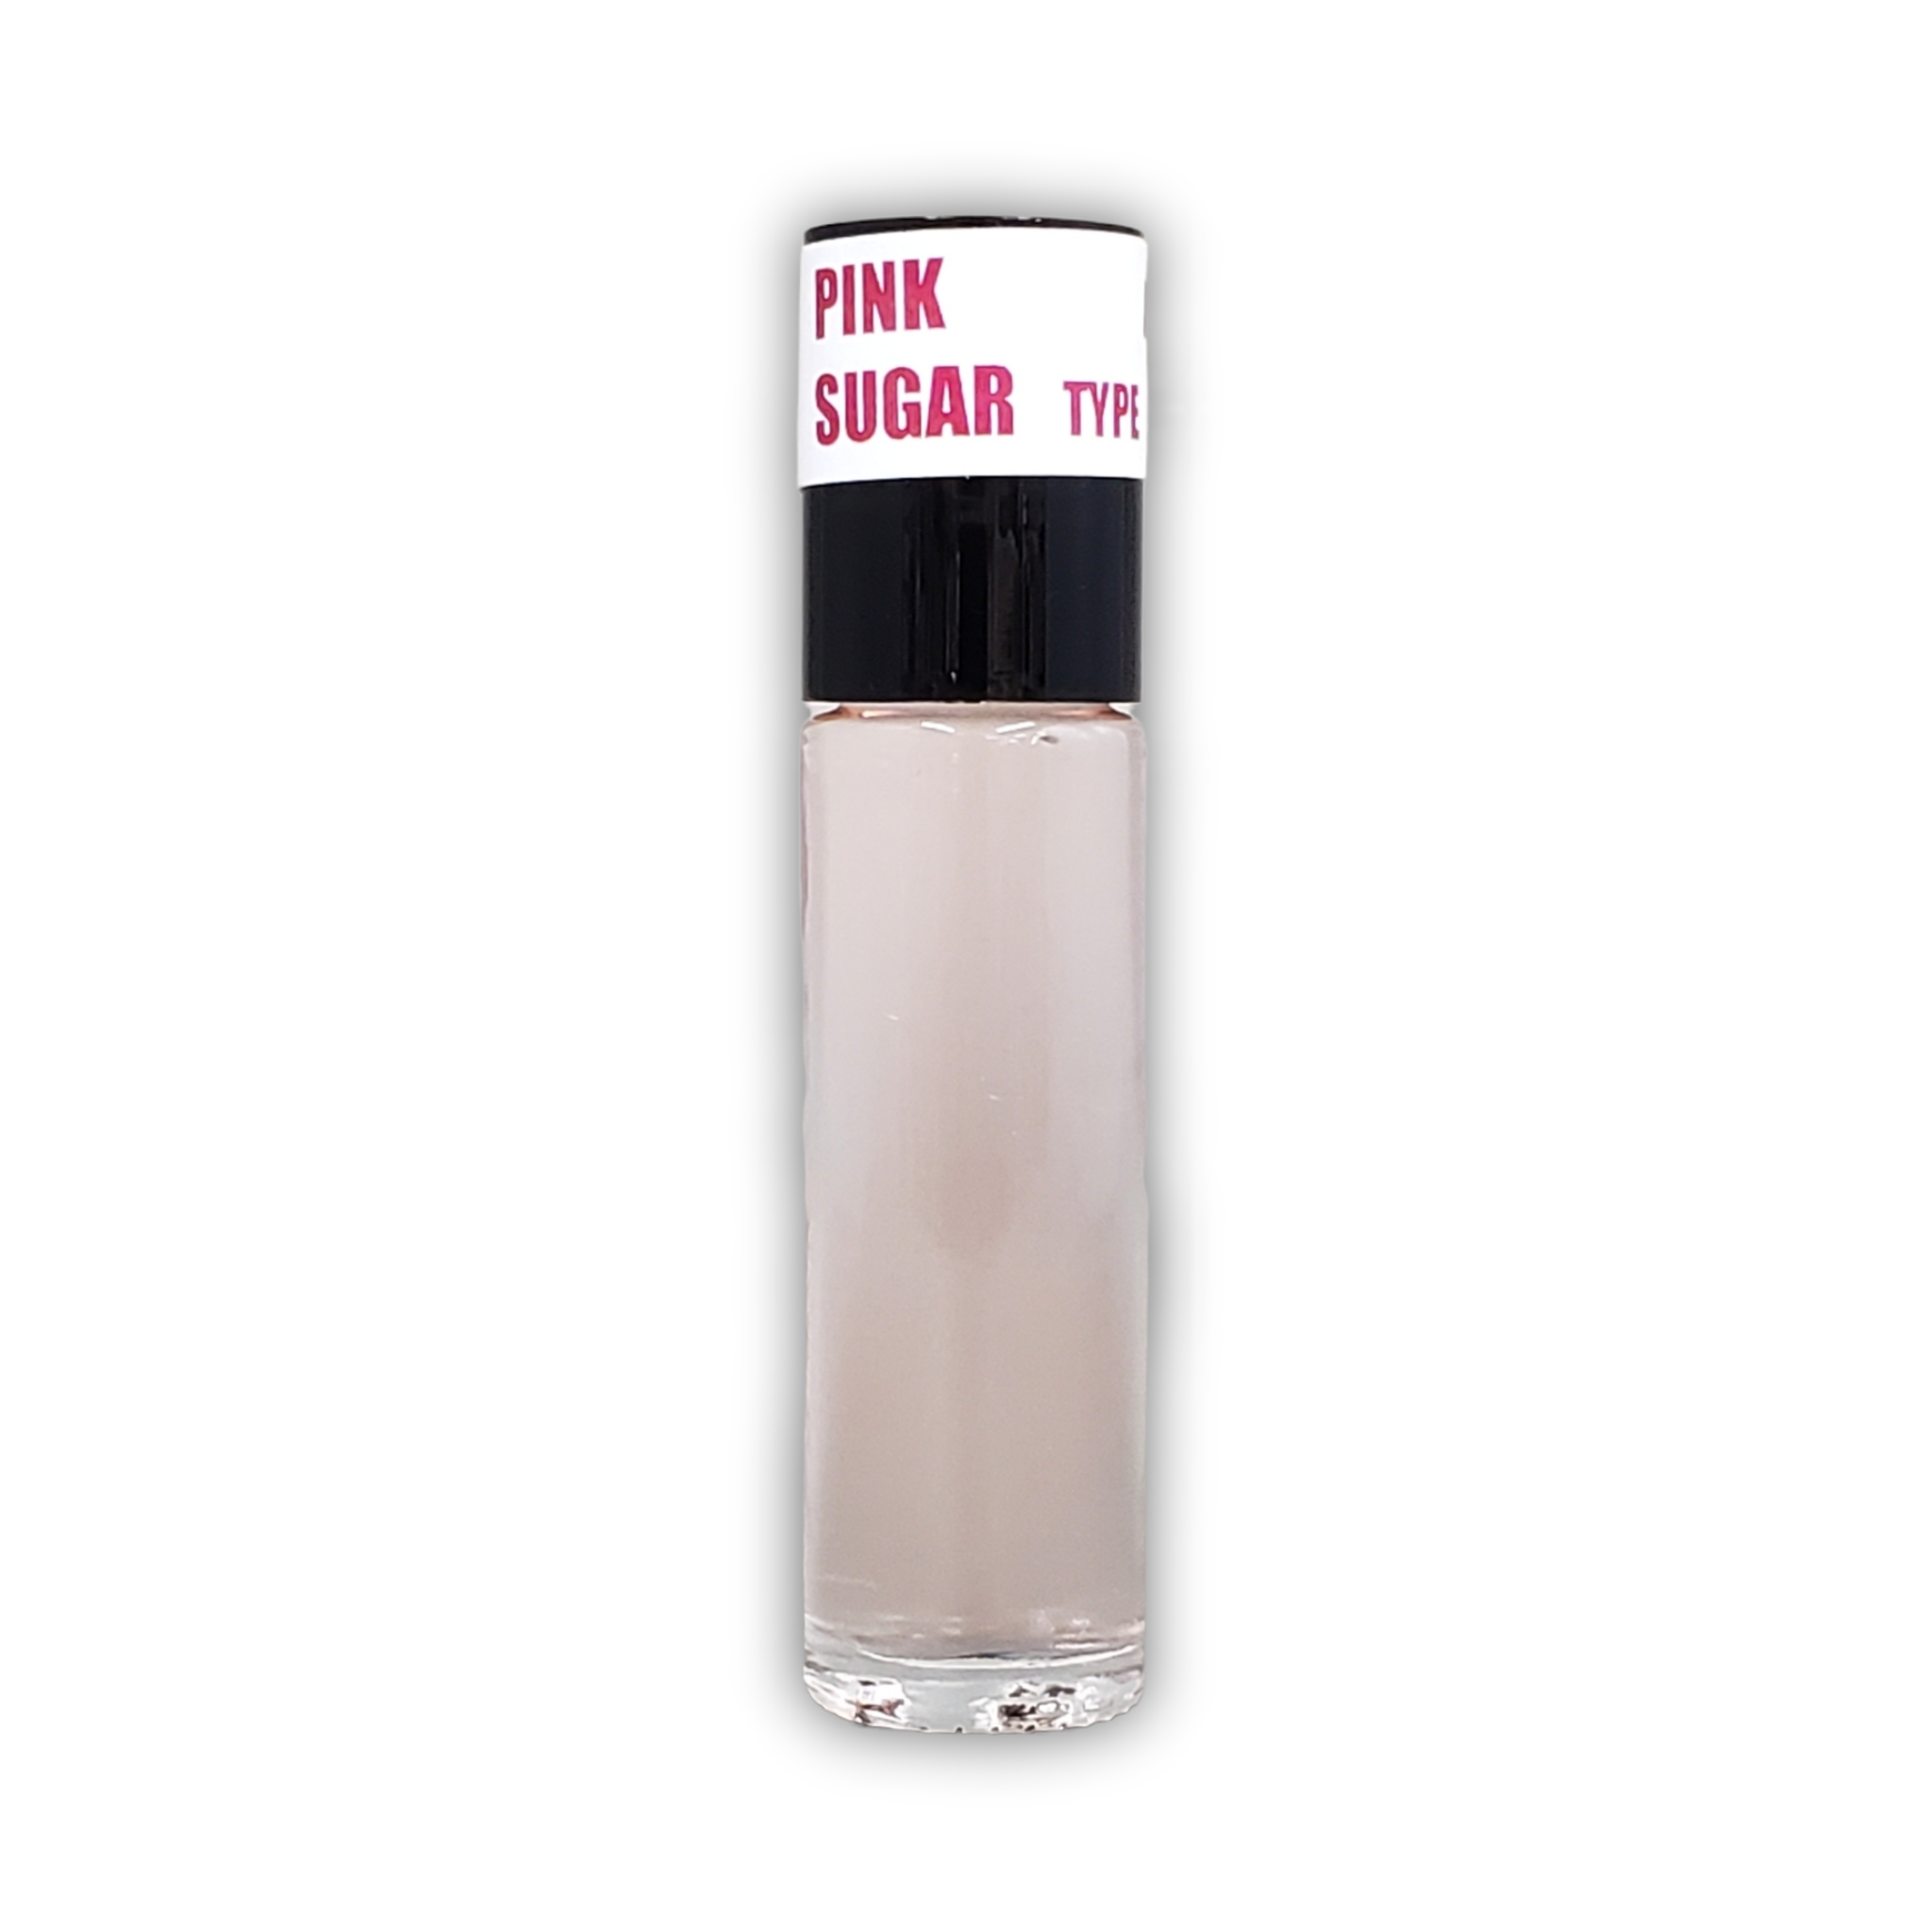 Buy Best Pink Sugar Body Oil for Women @ Low Cost – Incense Pro